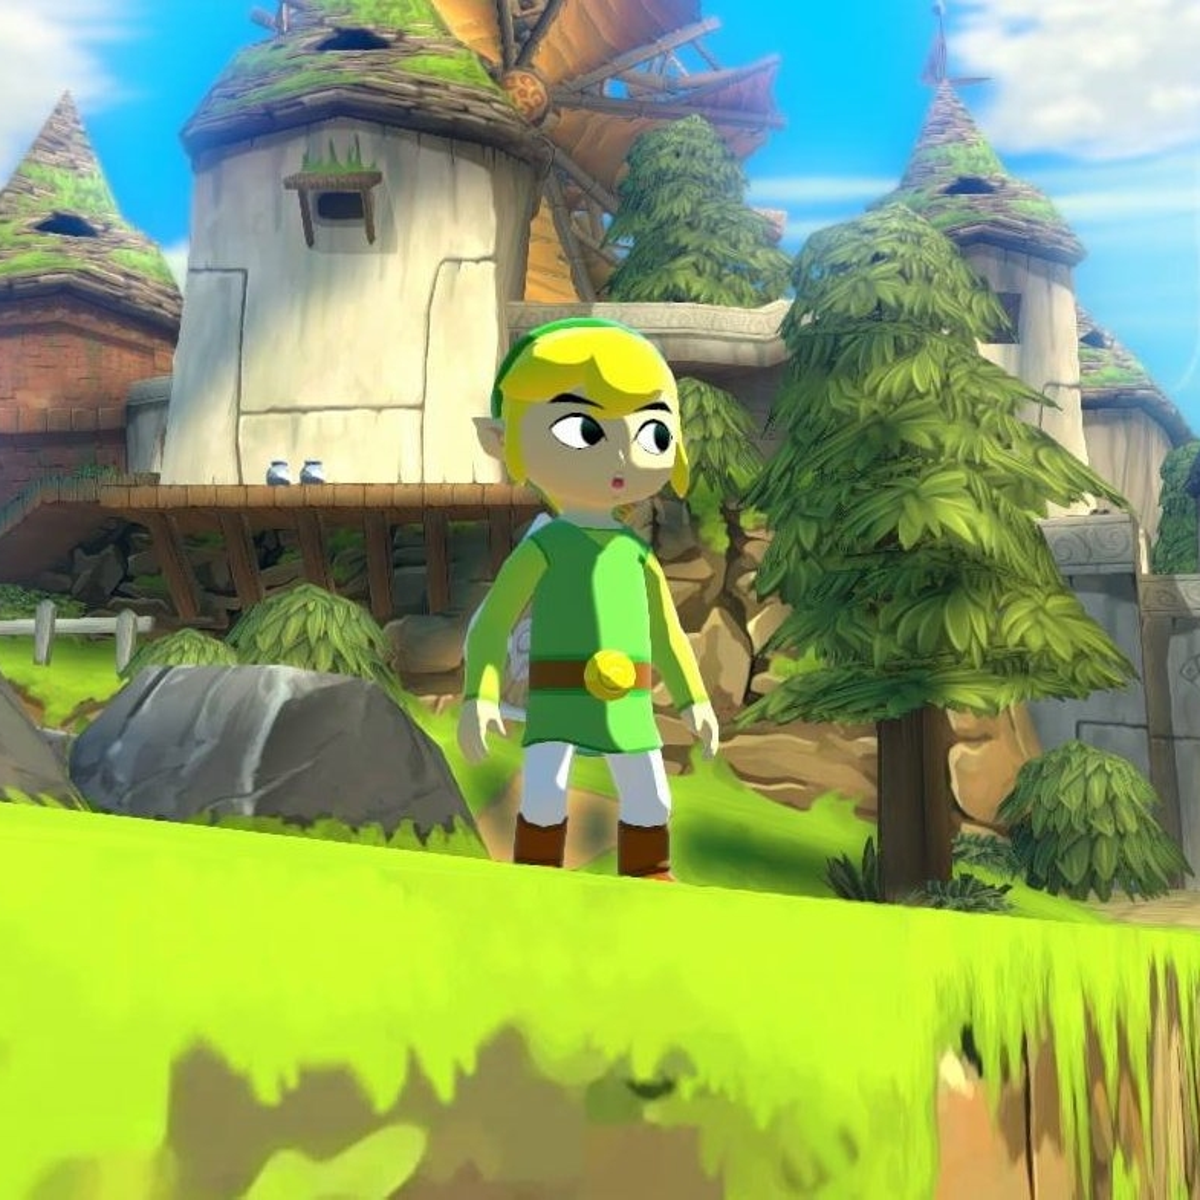 Wind Waker Remake Puts GameCube Classic On The Switch